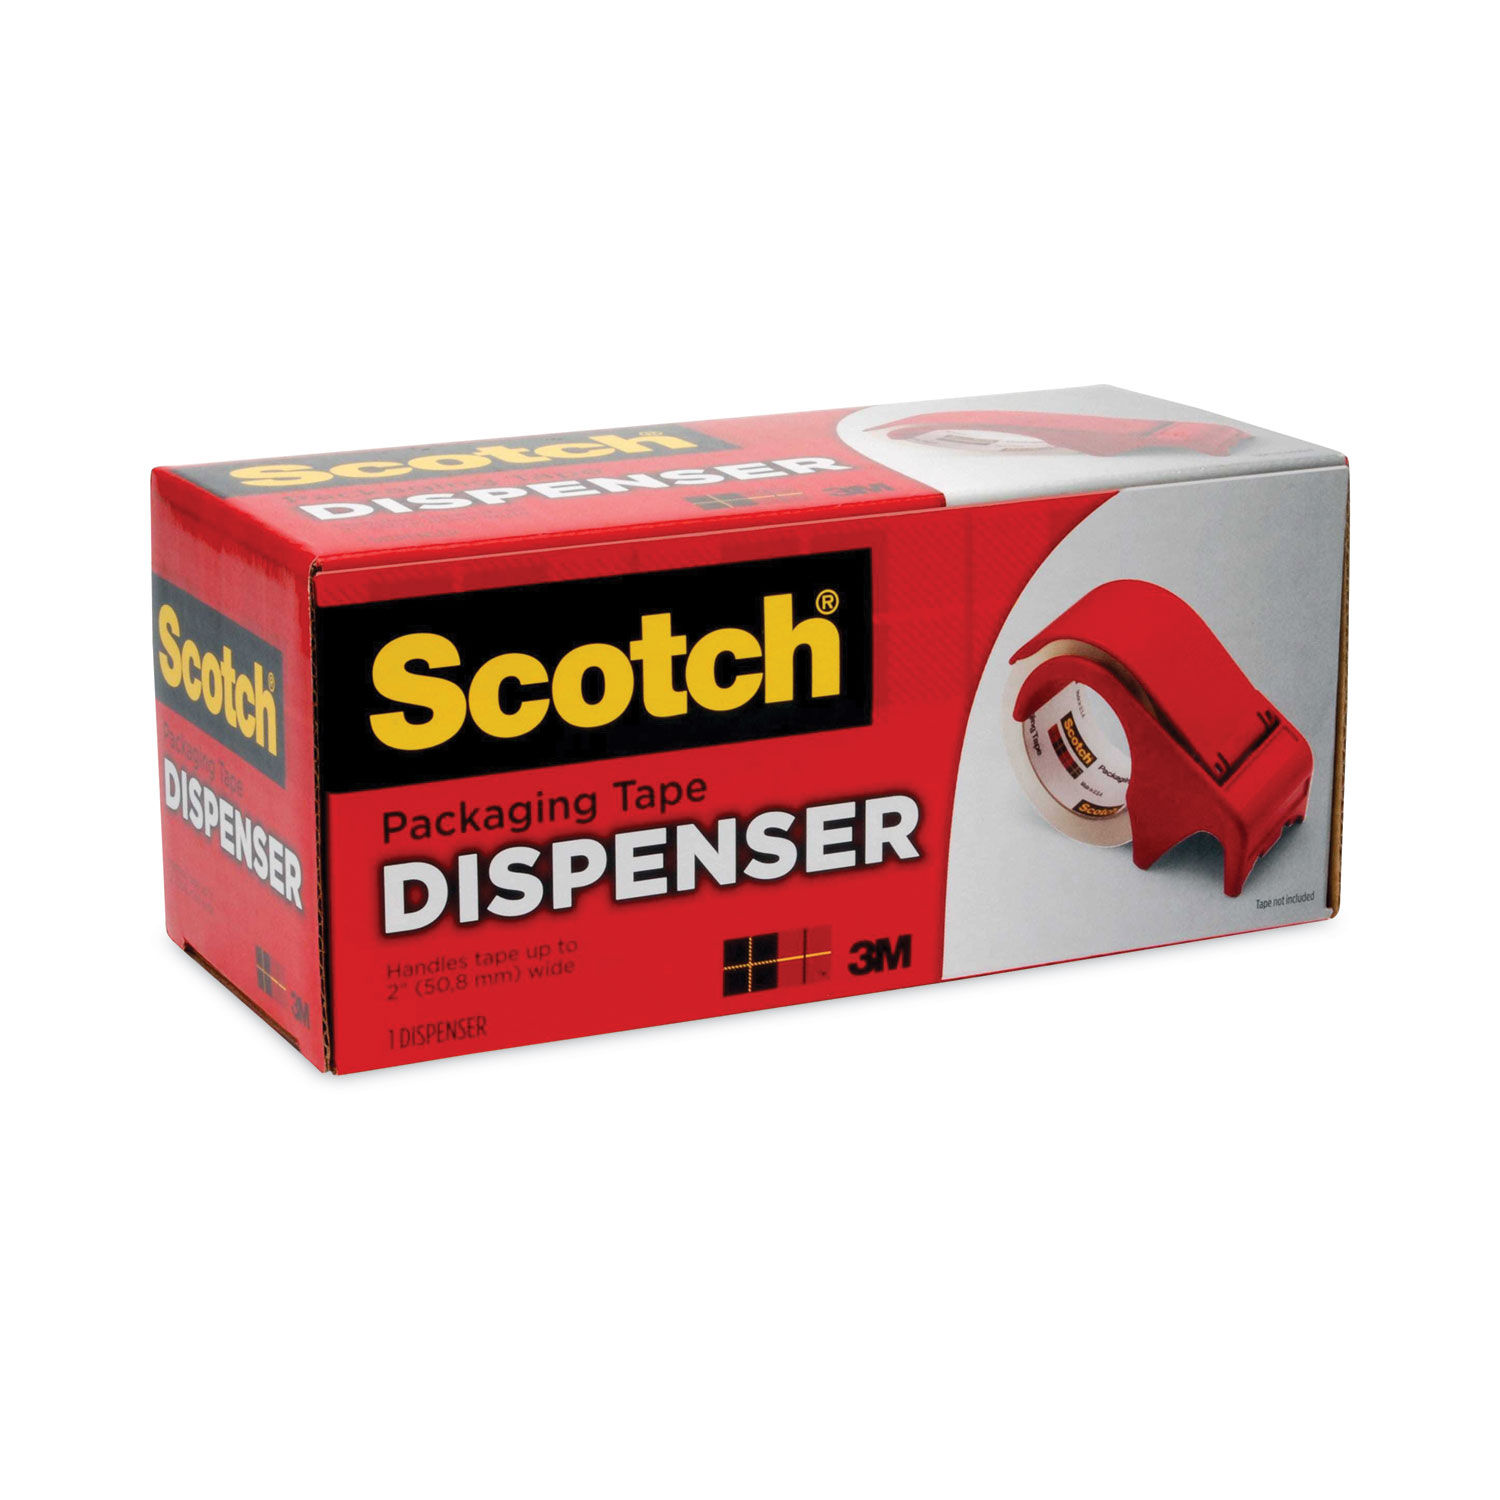 Compact and Quick Loading Dispenser for Box Sealing Tape by Scotch